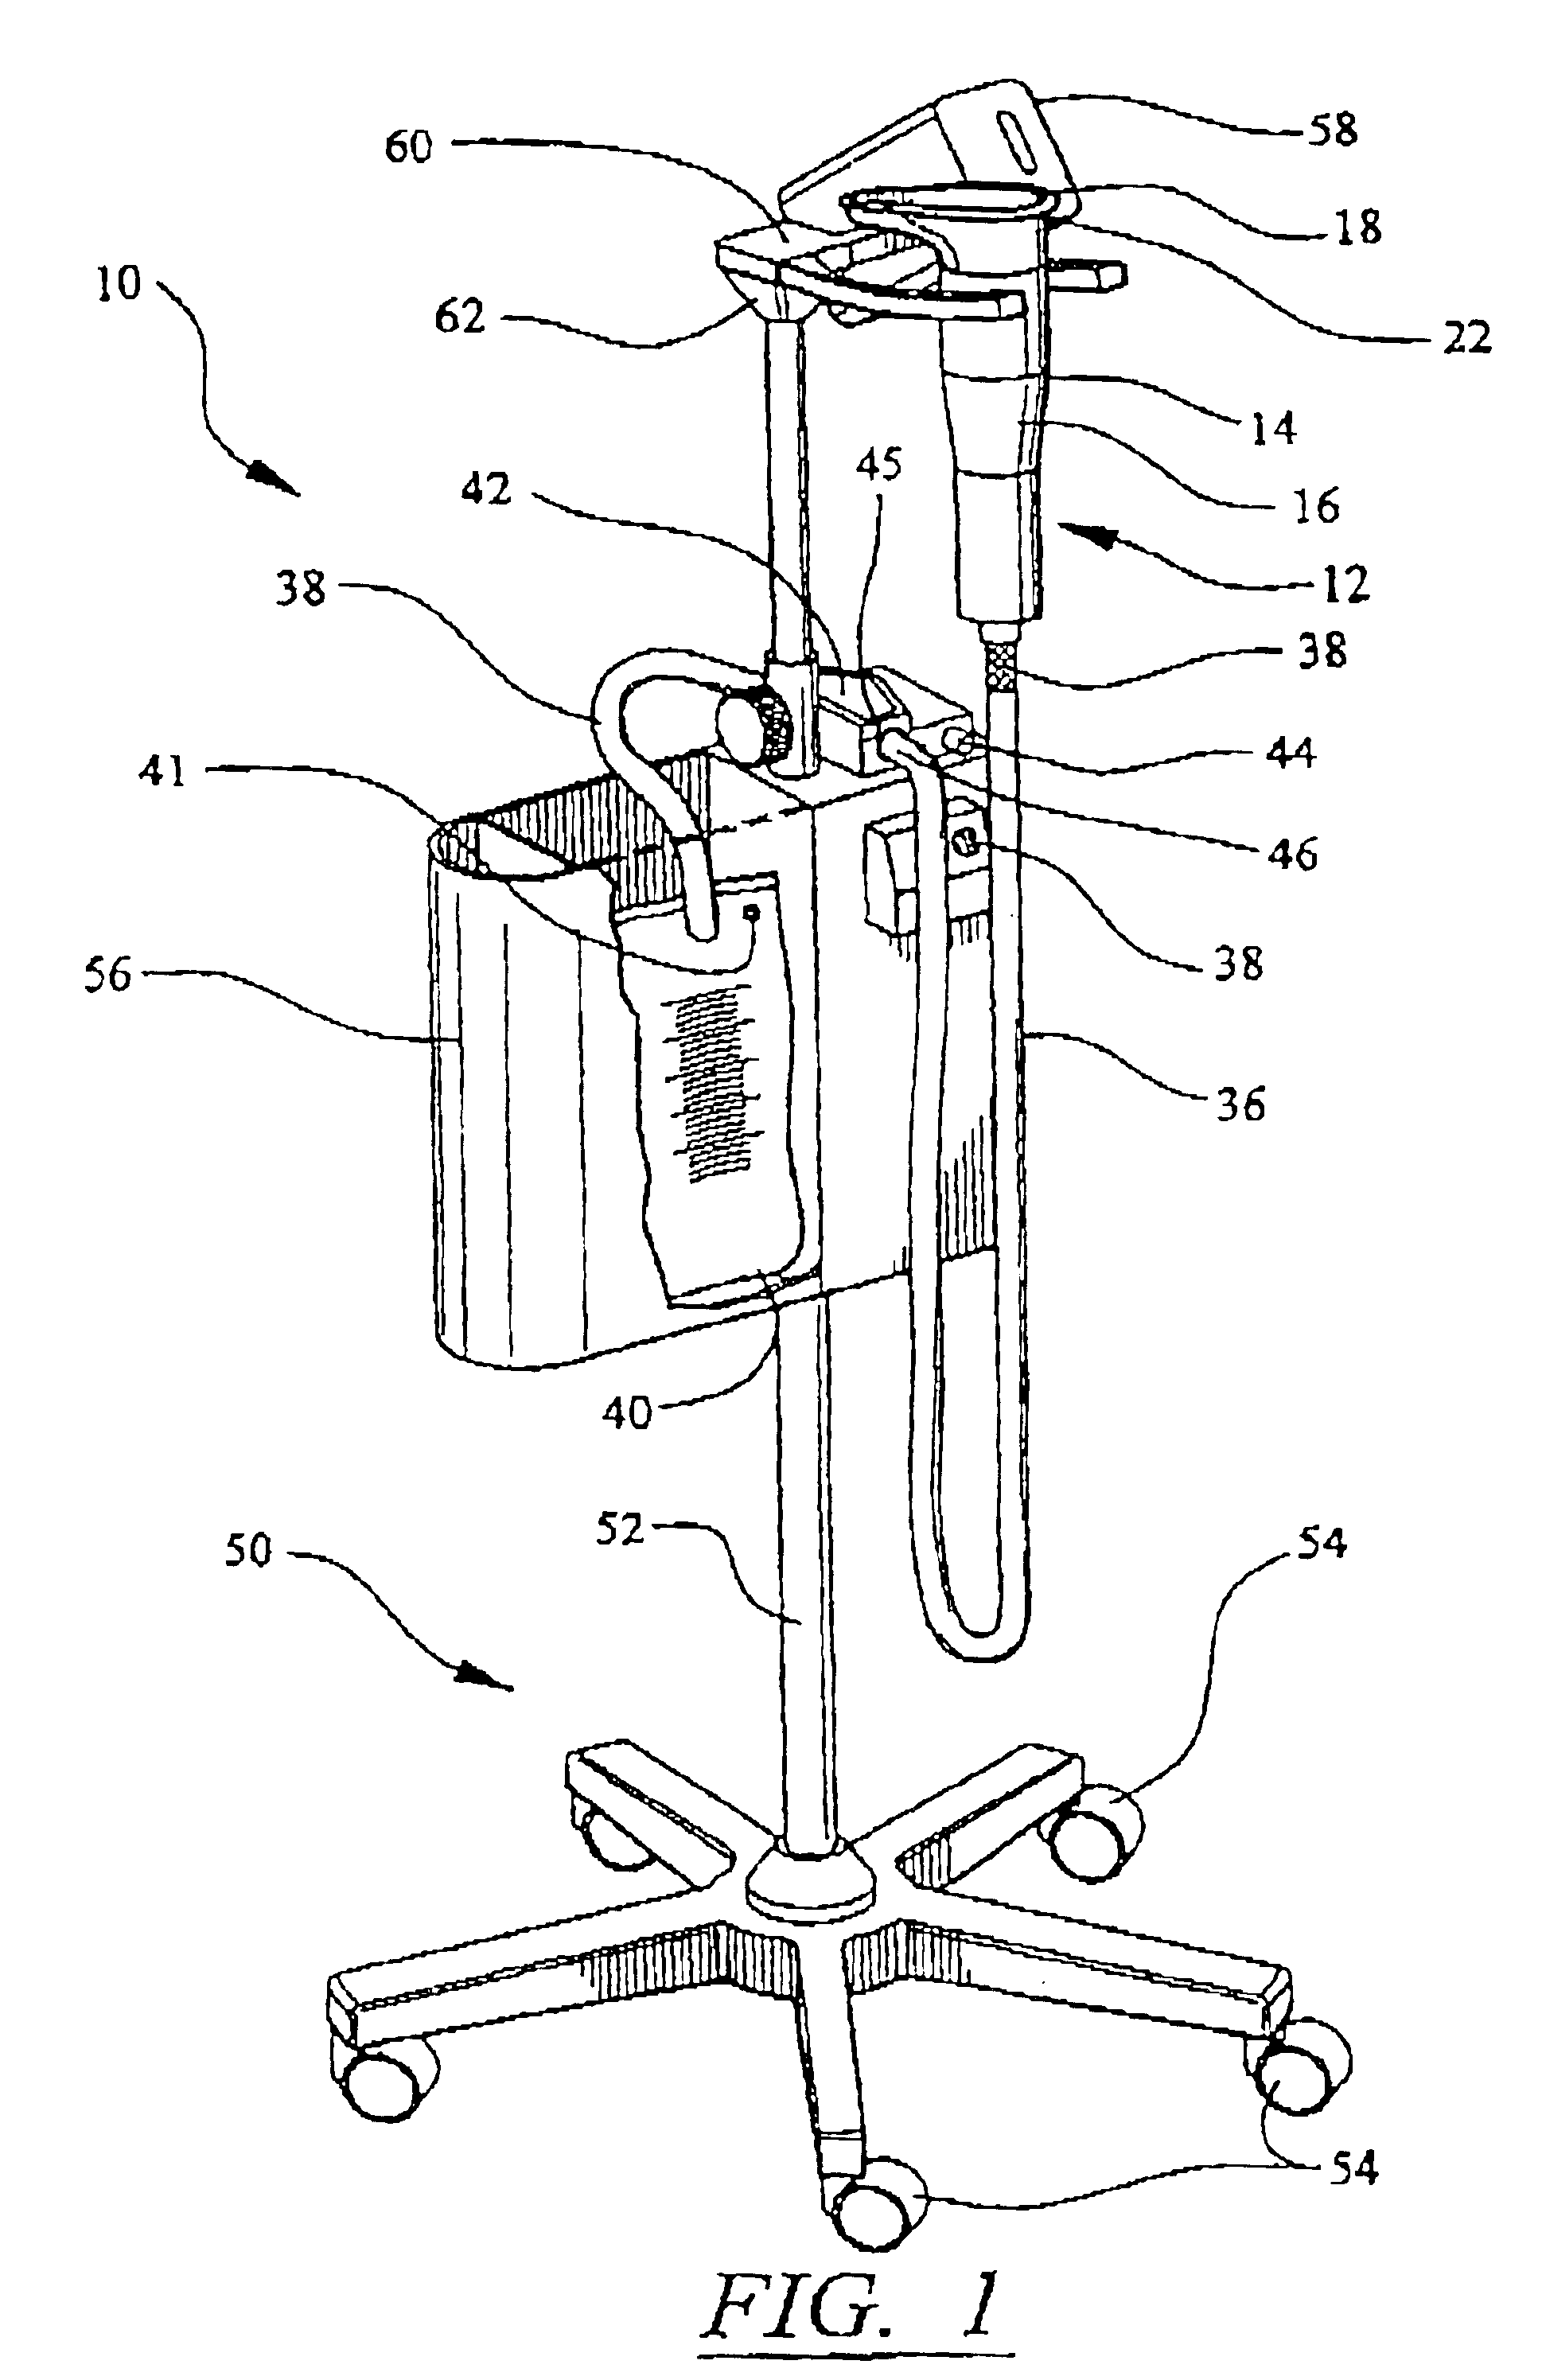 Urine collection device